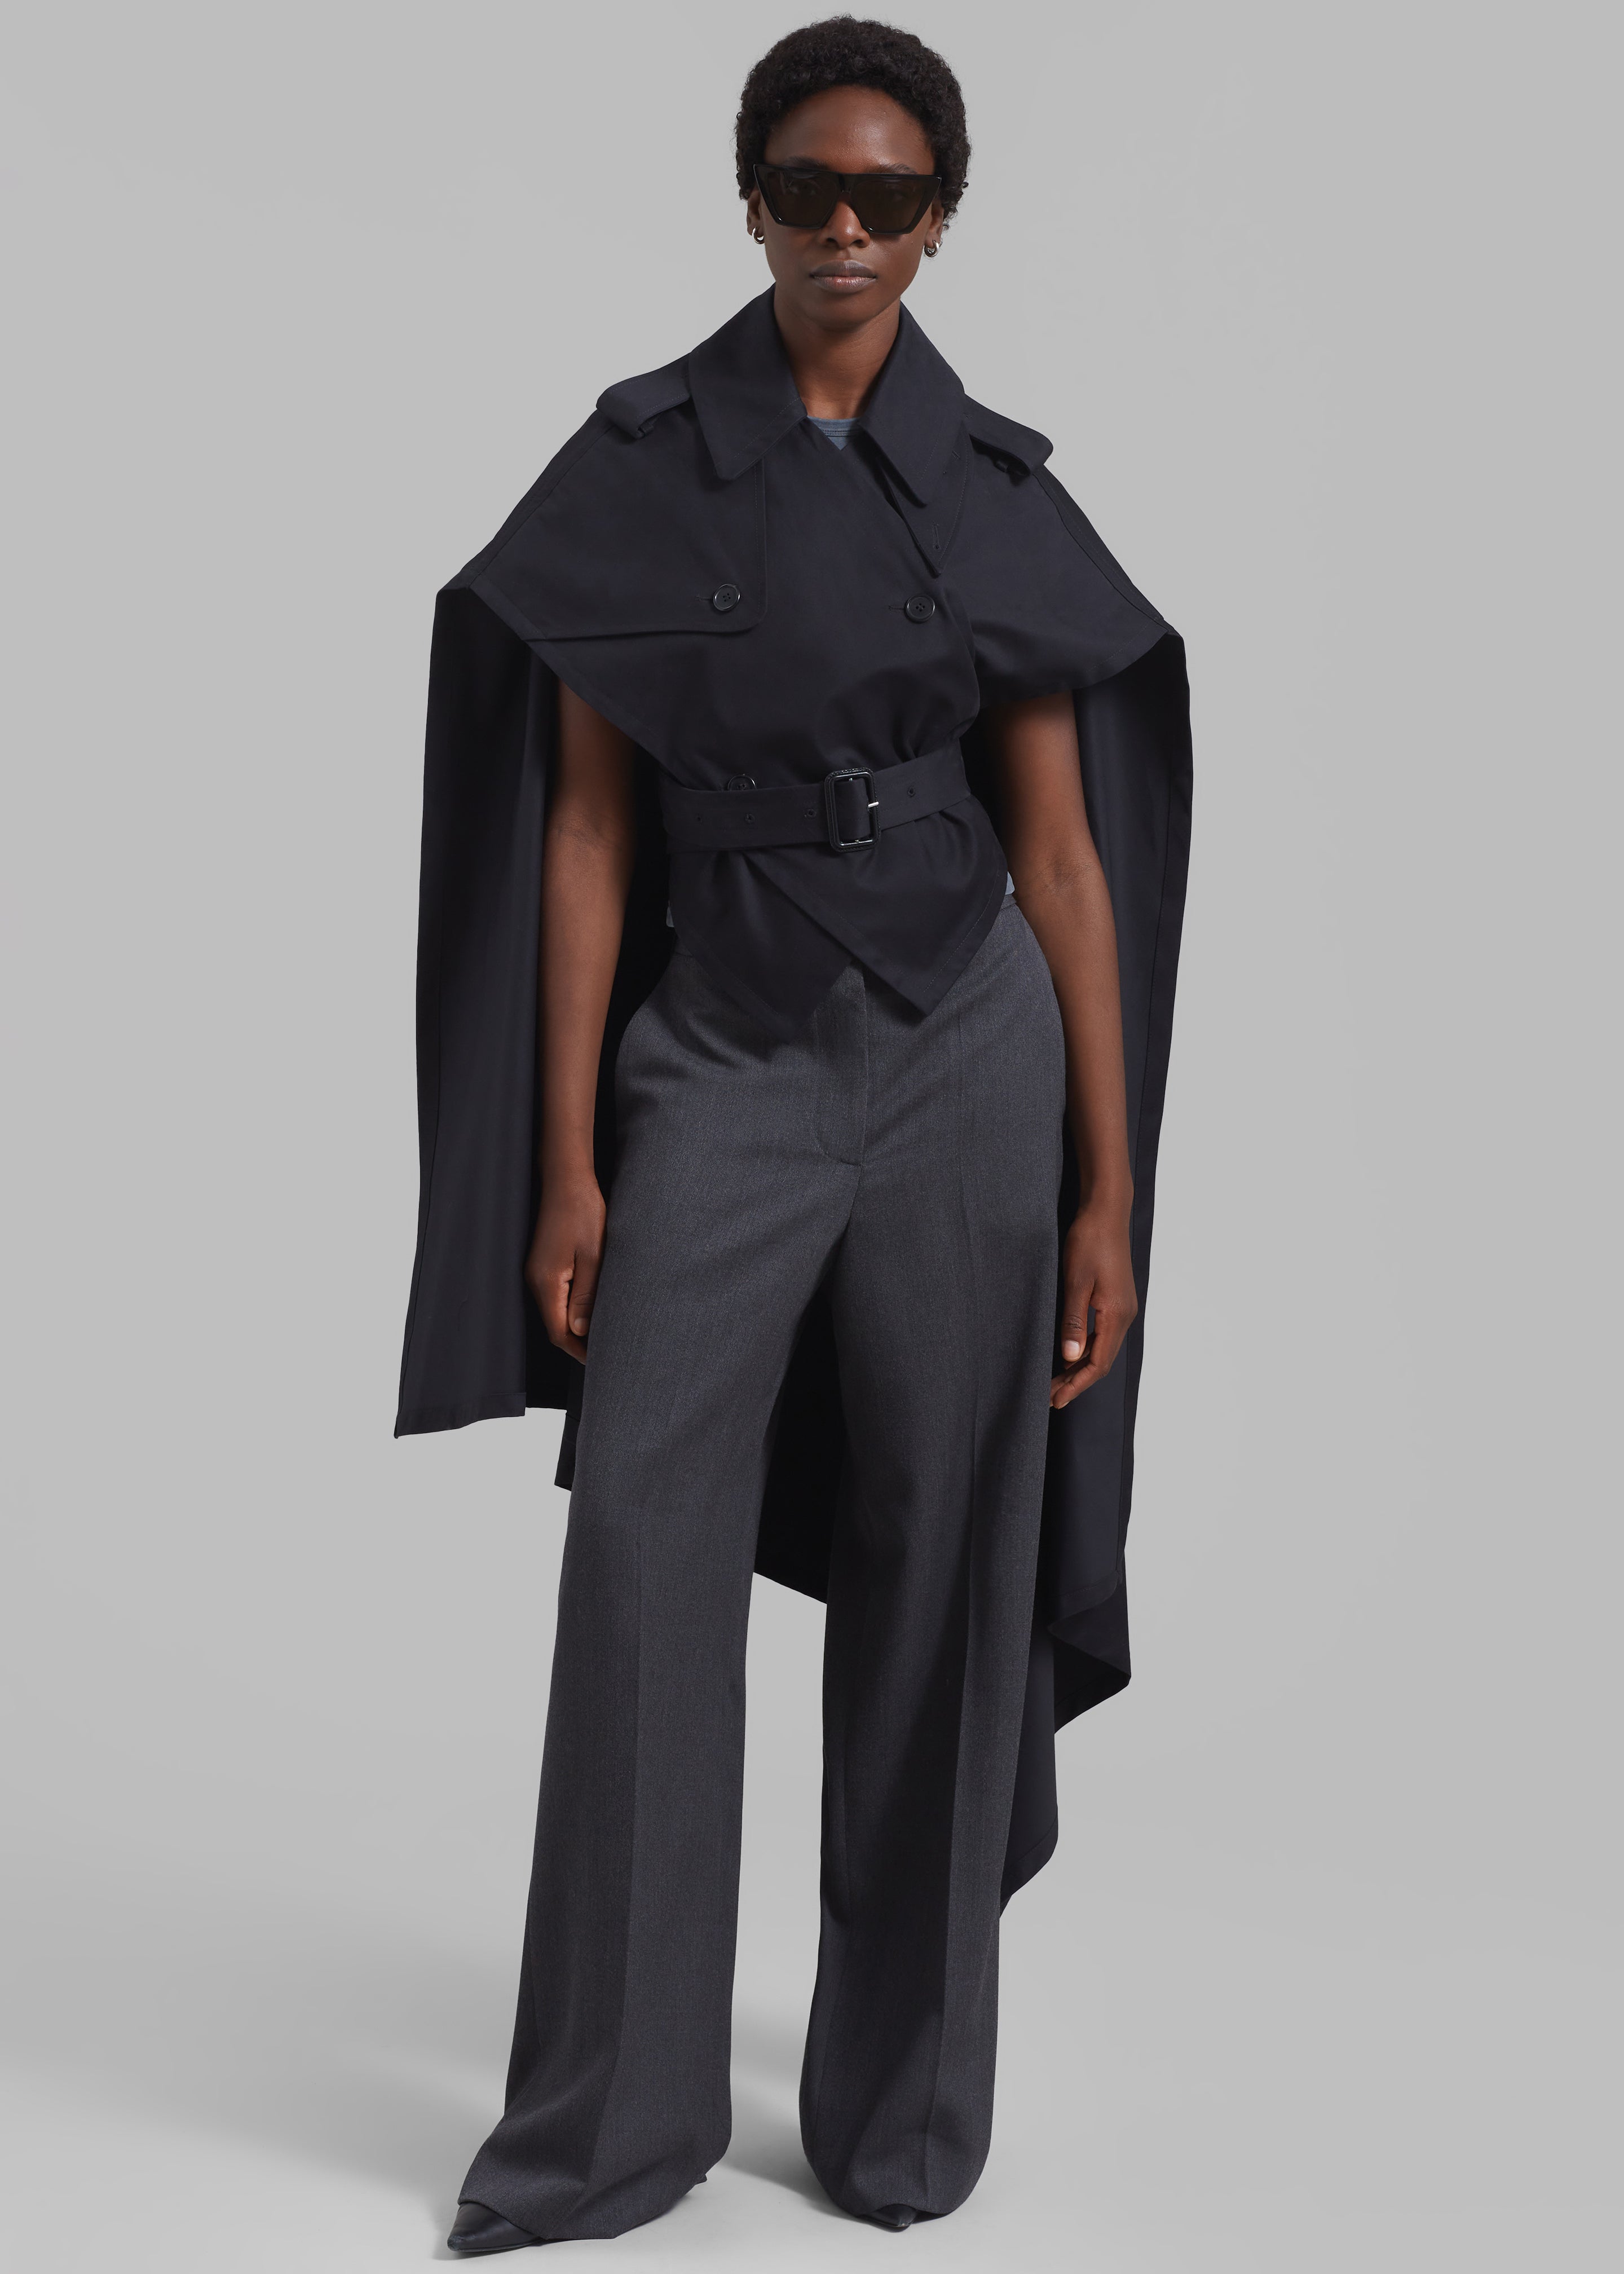 JW Anderson Trench Cape - Black - 3